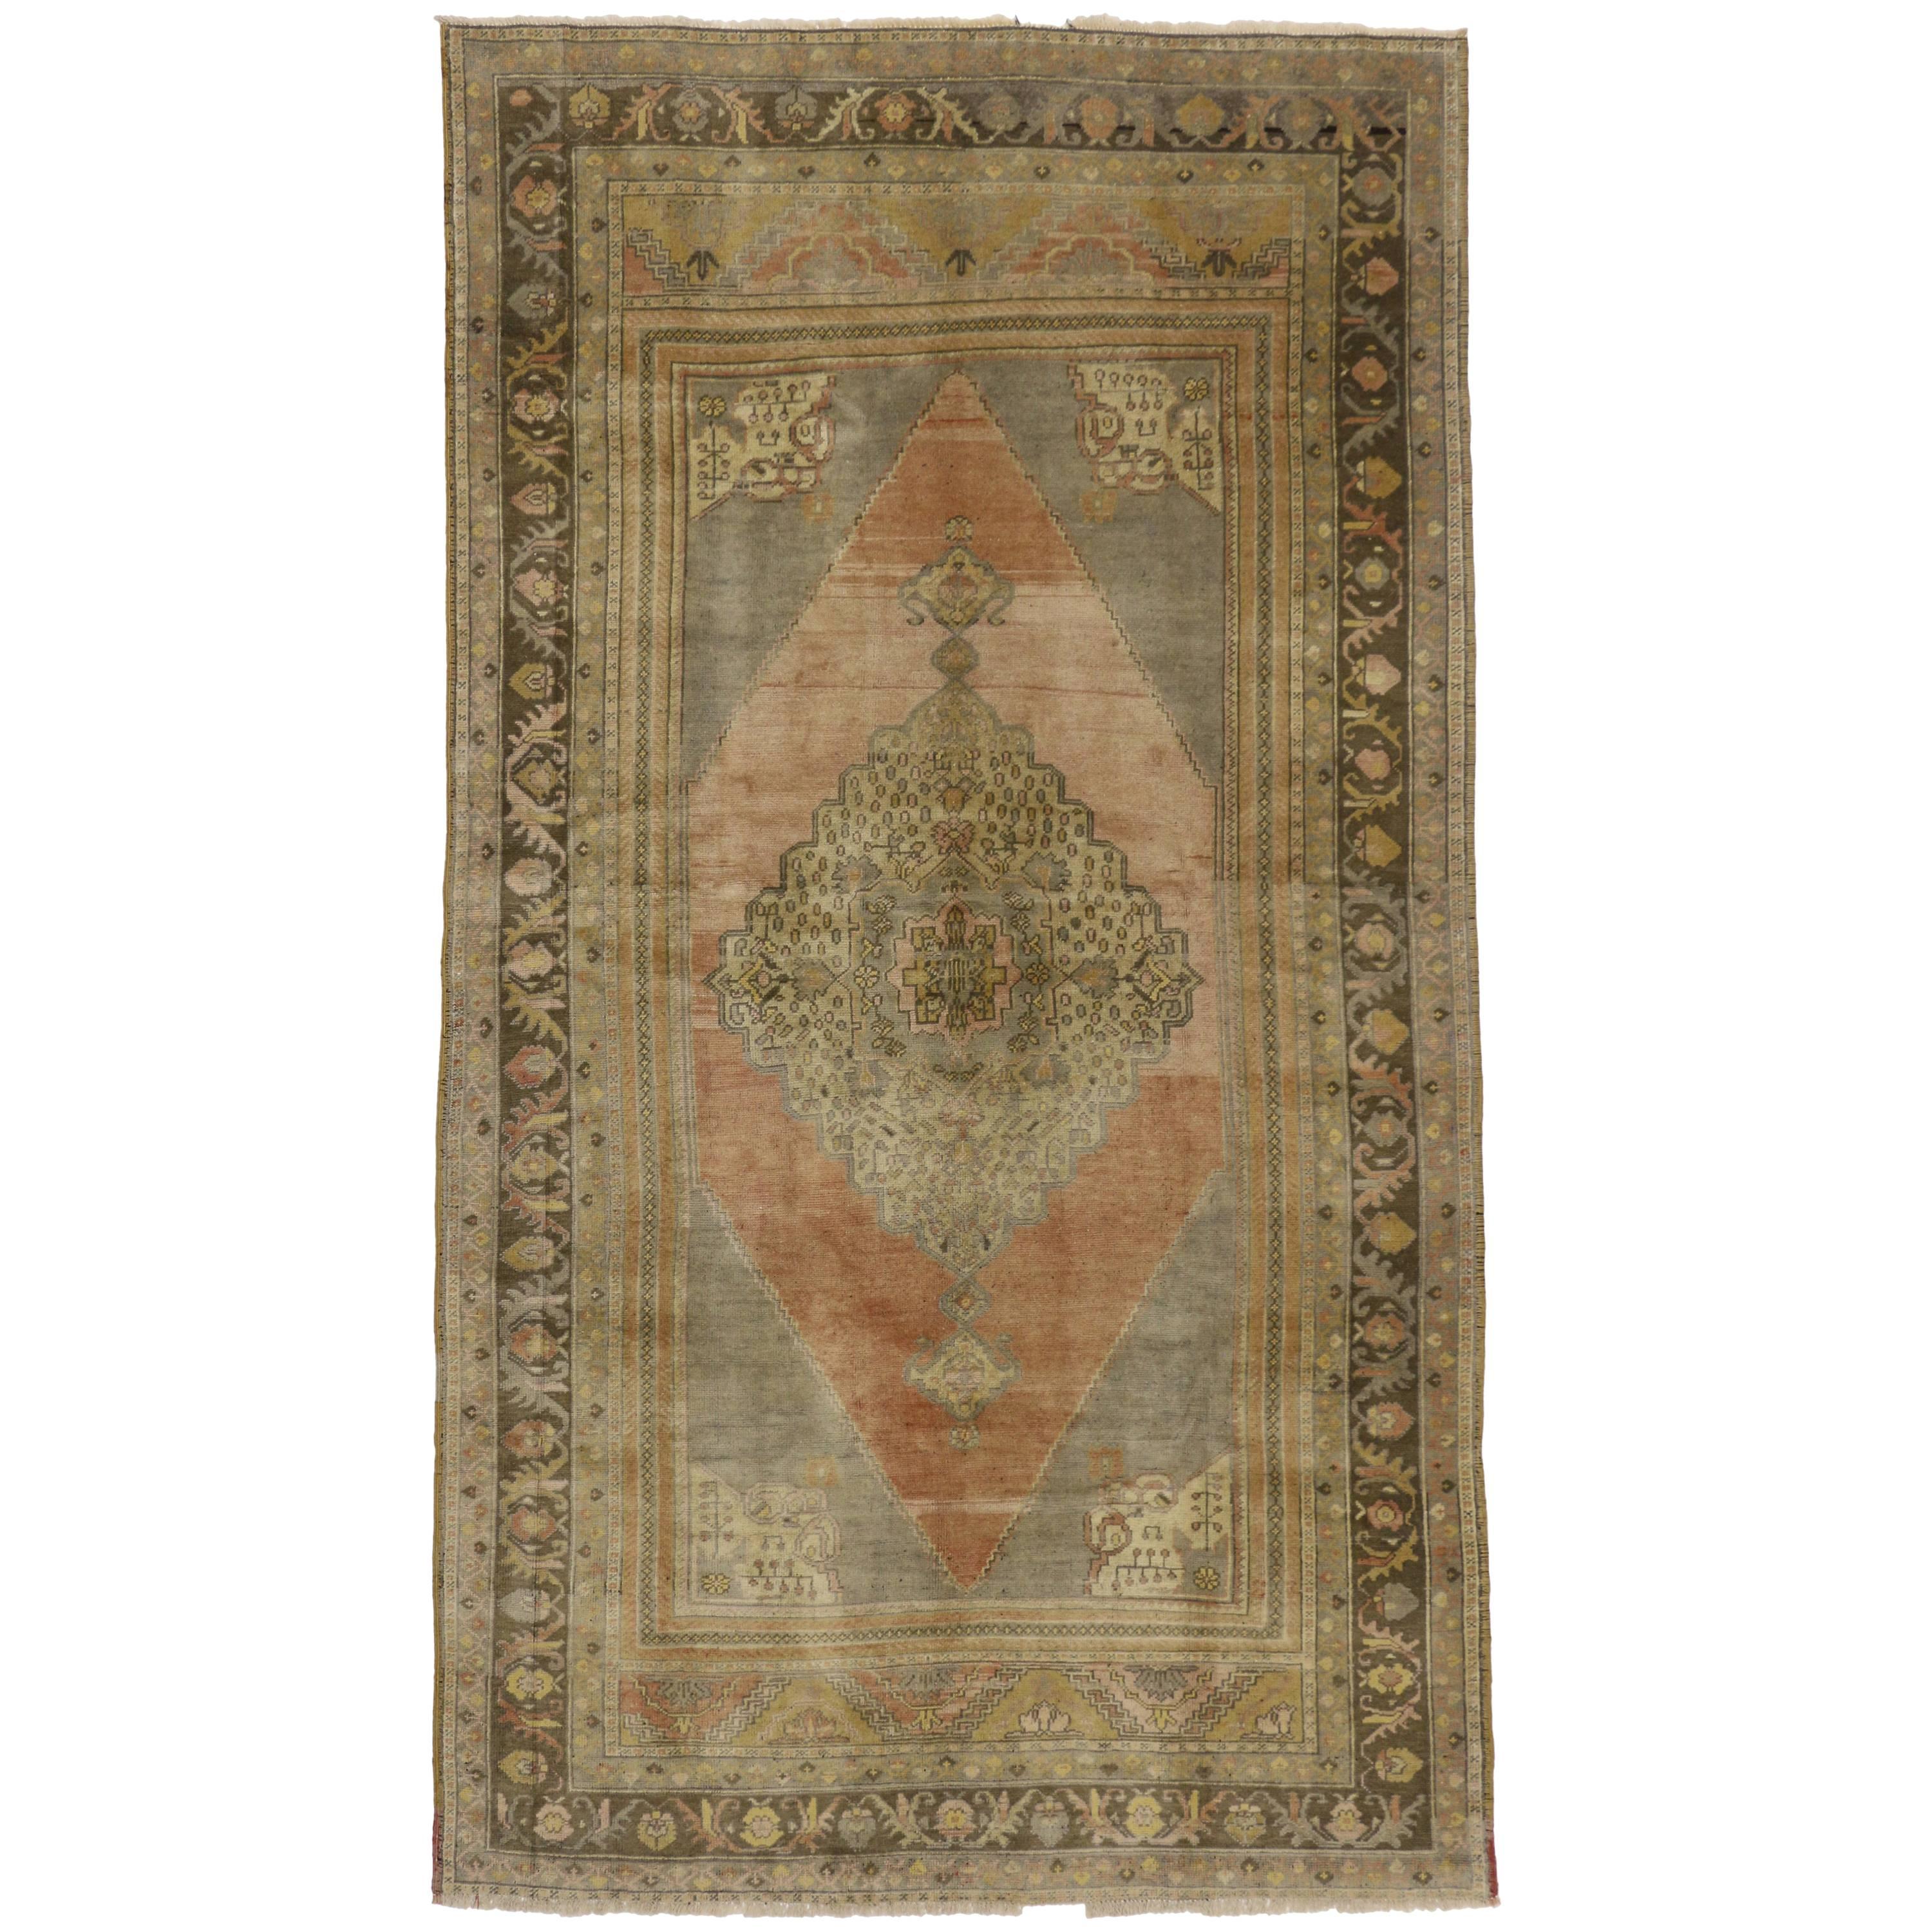 Vintage Turkish Oushak Carpet Gallery Rug, Wide Oushak Runner with Muted Colors